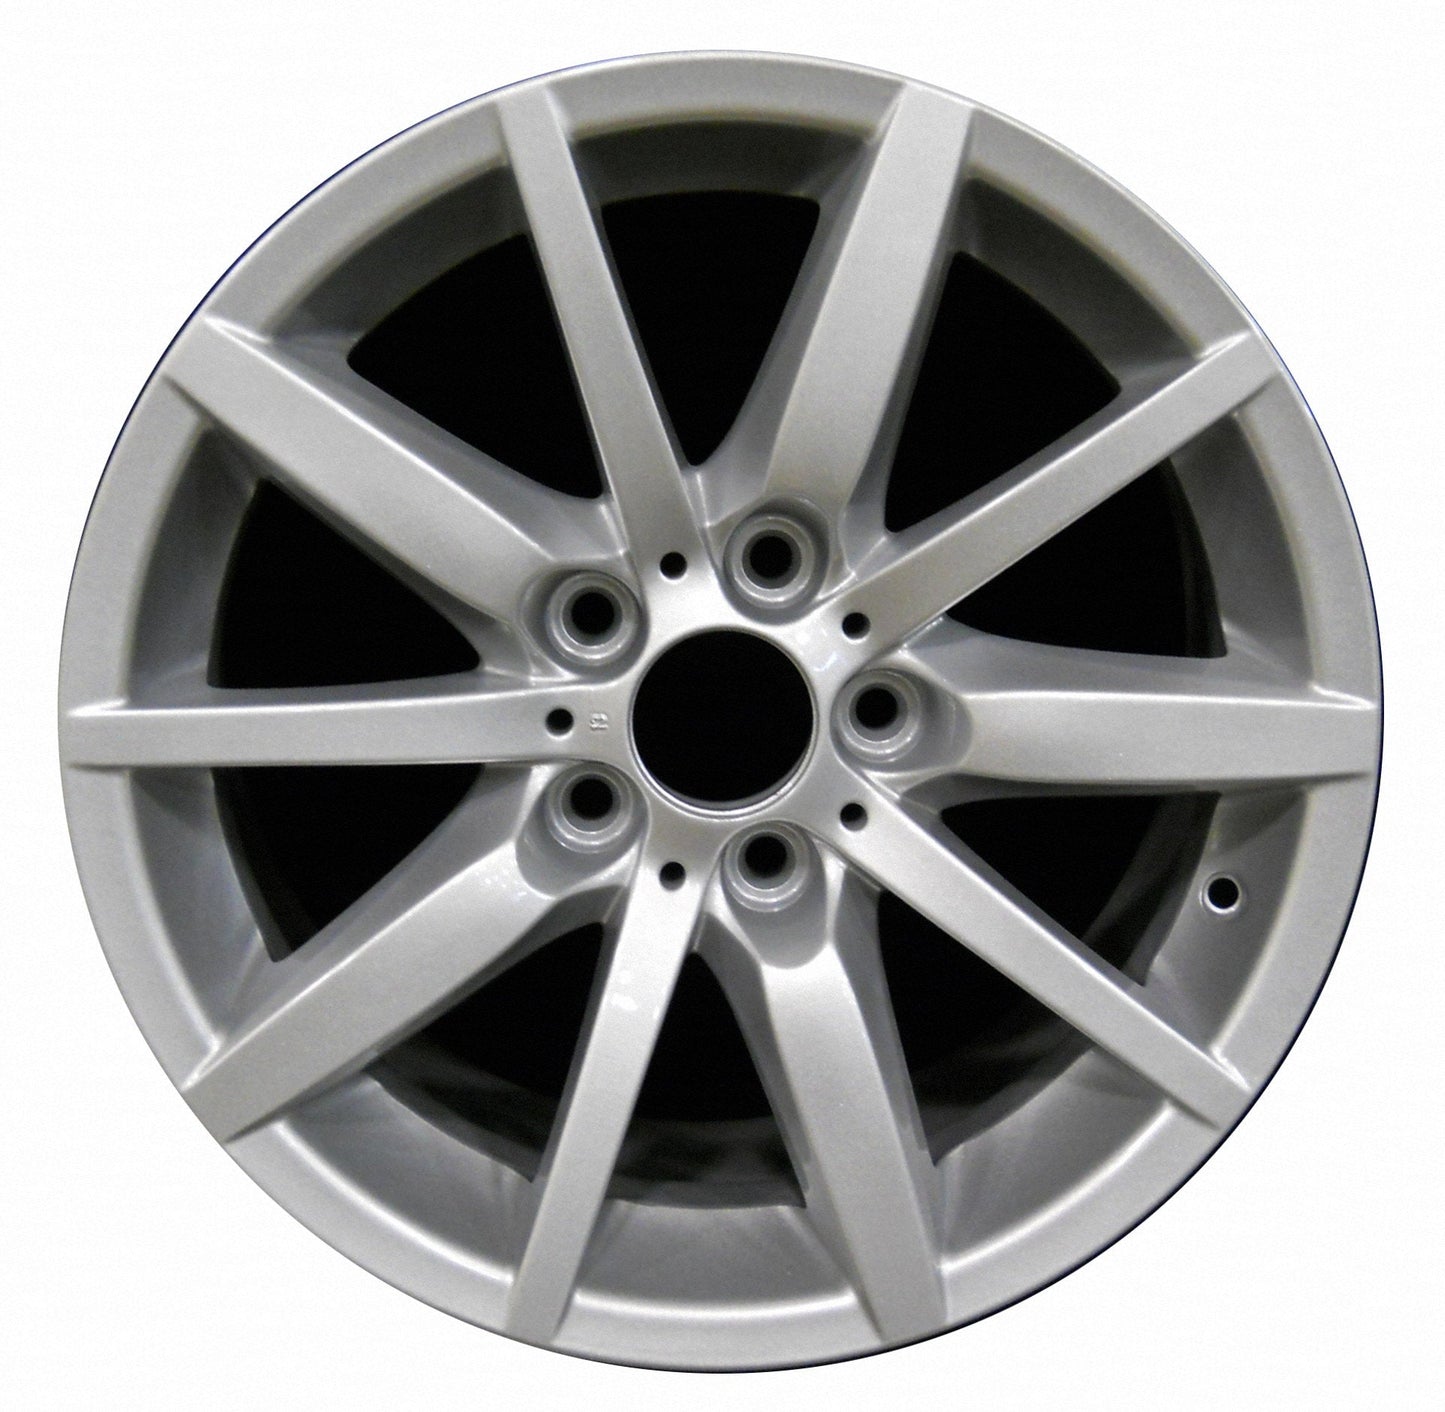 BMW 328i  2008, 2009, 2010, 2011, 2012, 2013 Factory OEM Car Wheel Size 17x8.5 Alloy WAO.71319RE.PS14.FF